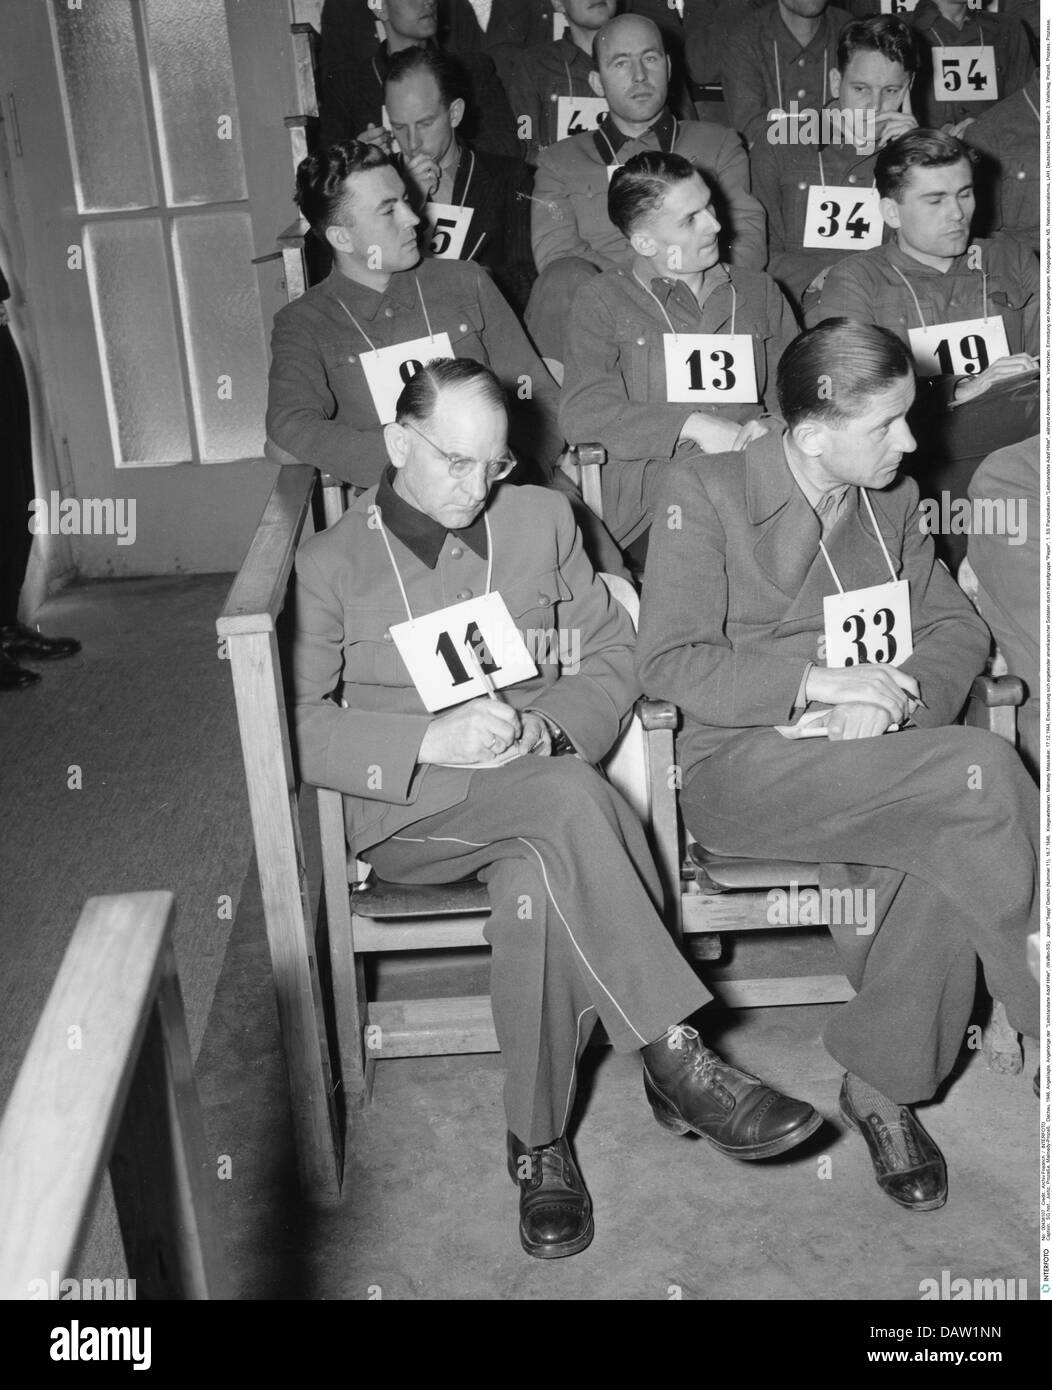 justice, trials, Malmedy massacre trial, Dachau, Germany, 1946, defendants, members of the 1st SS Panzer Division 'Leibstandarte Adolf Hitler', in front left (No. 11): Joseph 'Sepp' Dietrich, 16.7.1946, Additional-Rights-Clearences-Not Available Stock Photo